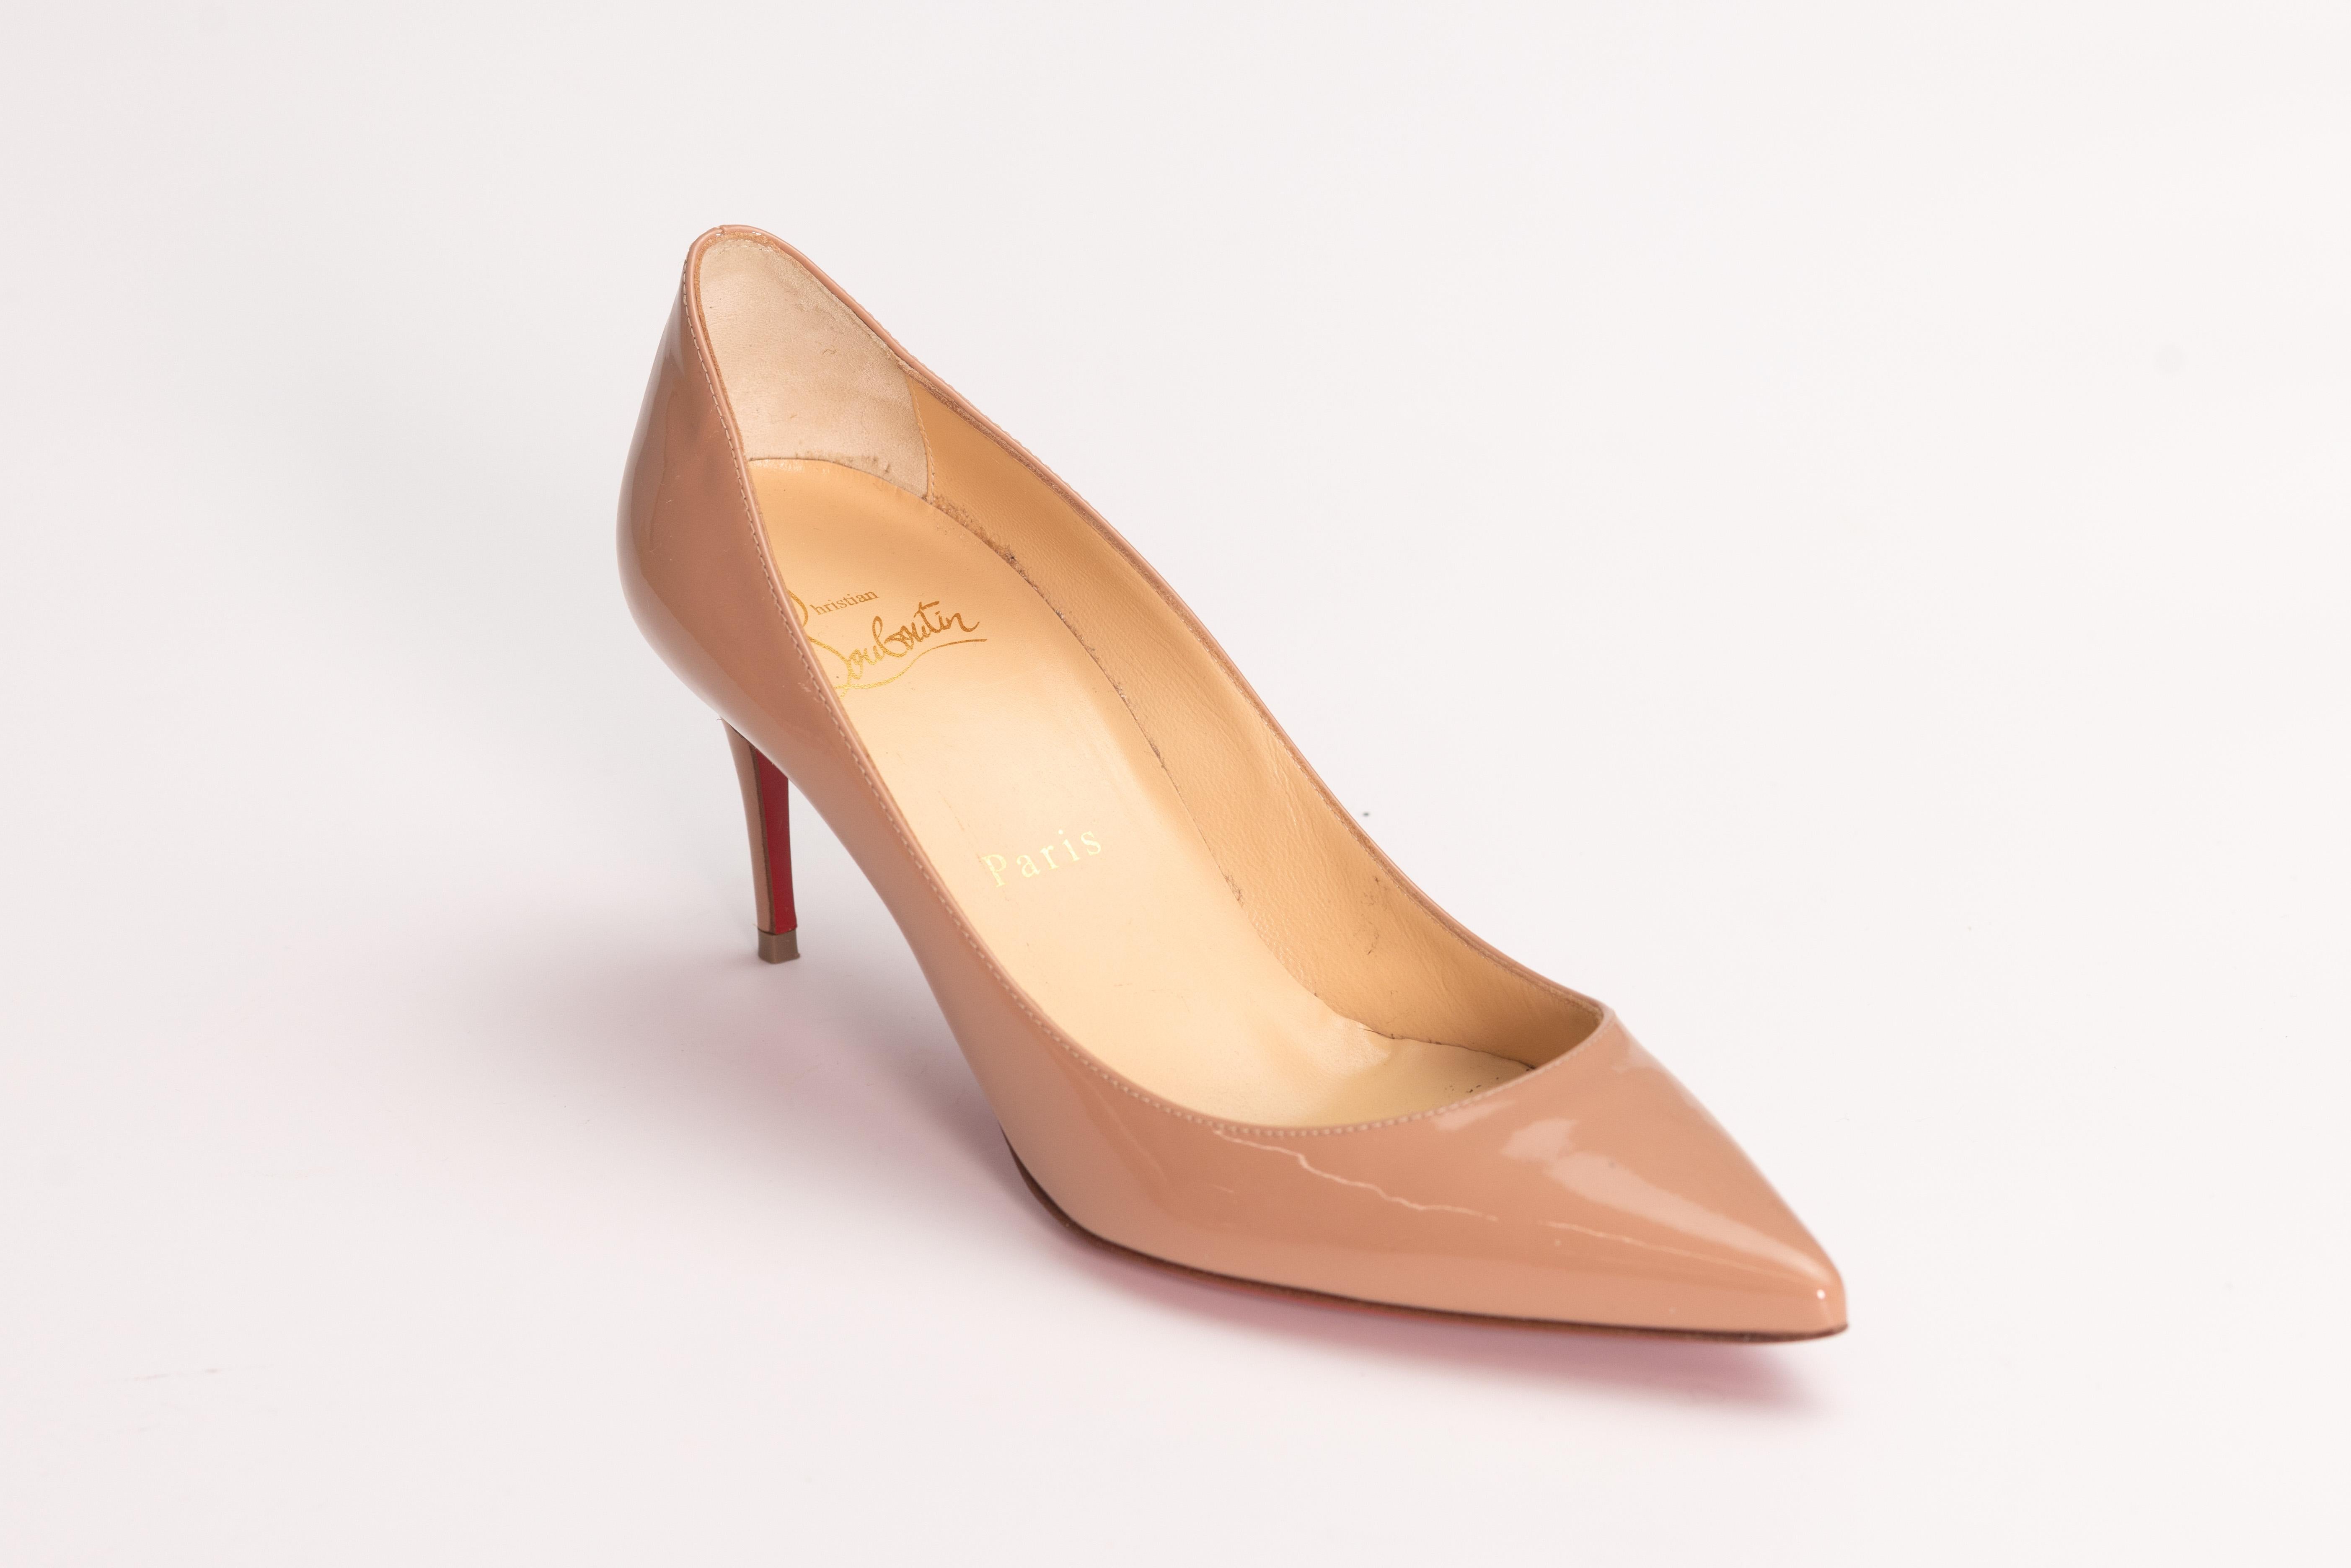 Color: Beige
Material: Patent leather
Size: 35.5 EU / 4.5 US
Heel Height: 50 mm / 2”
Condition: Very good. Light catches to the under soles. Faint hairline scratches to uppers from handling.
Comes with: Dust bag and box

Made in Italy